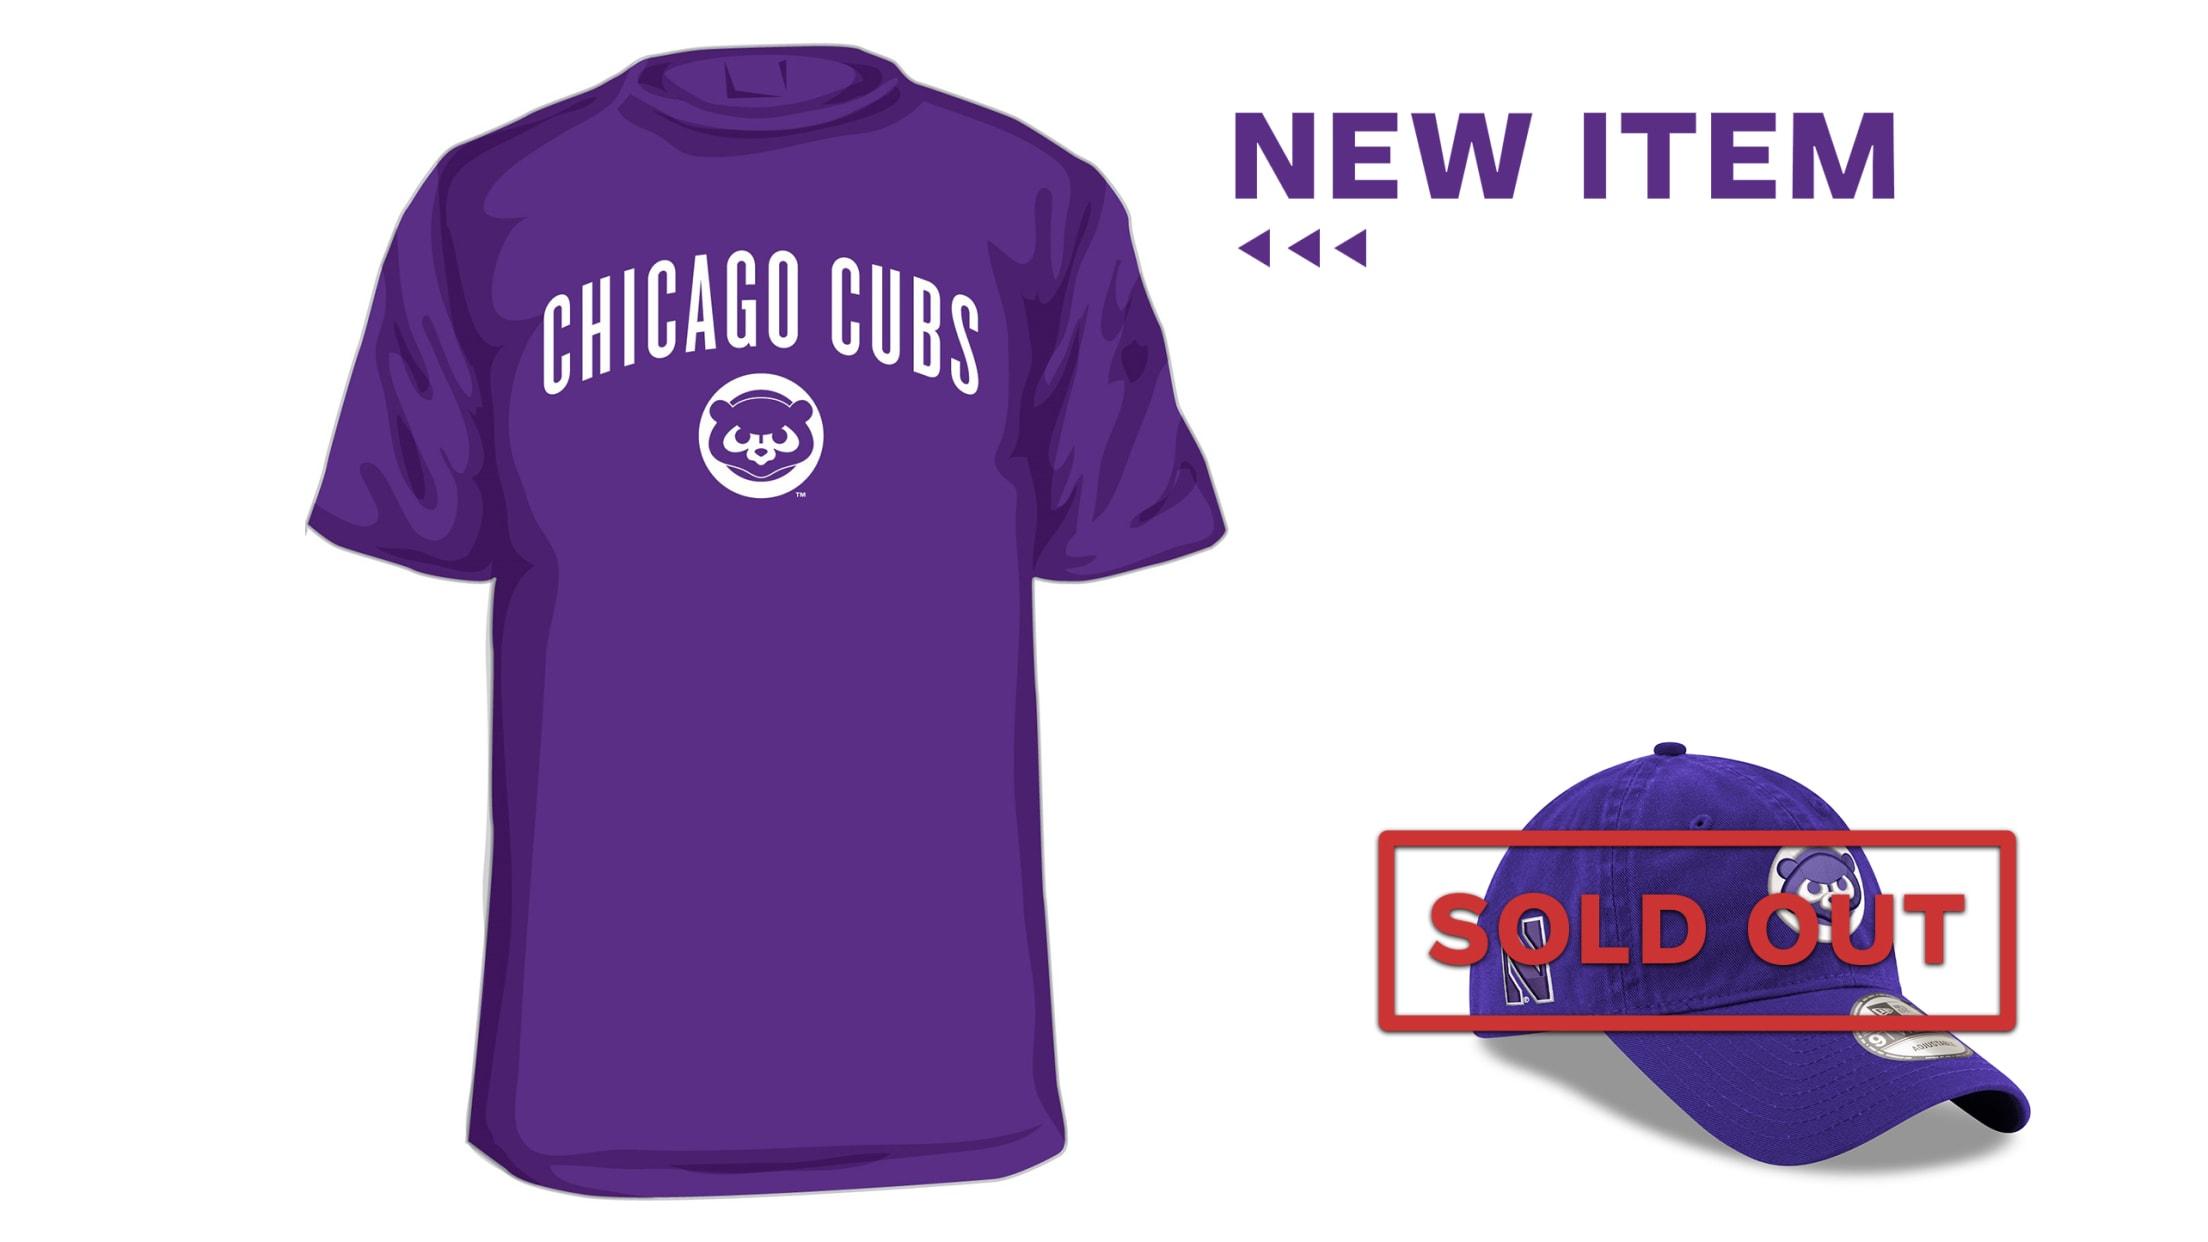 Chicago Gifts: Chicago Souvenirs, Chicago T-shirts, Chicago Cubs